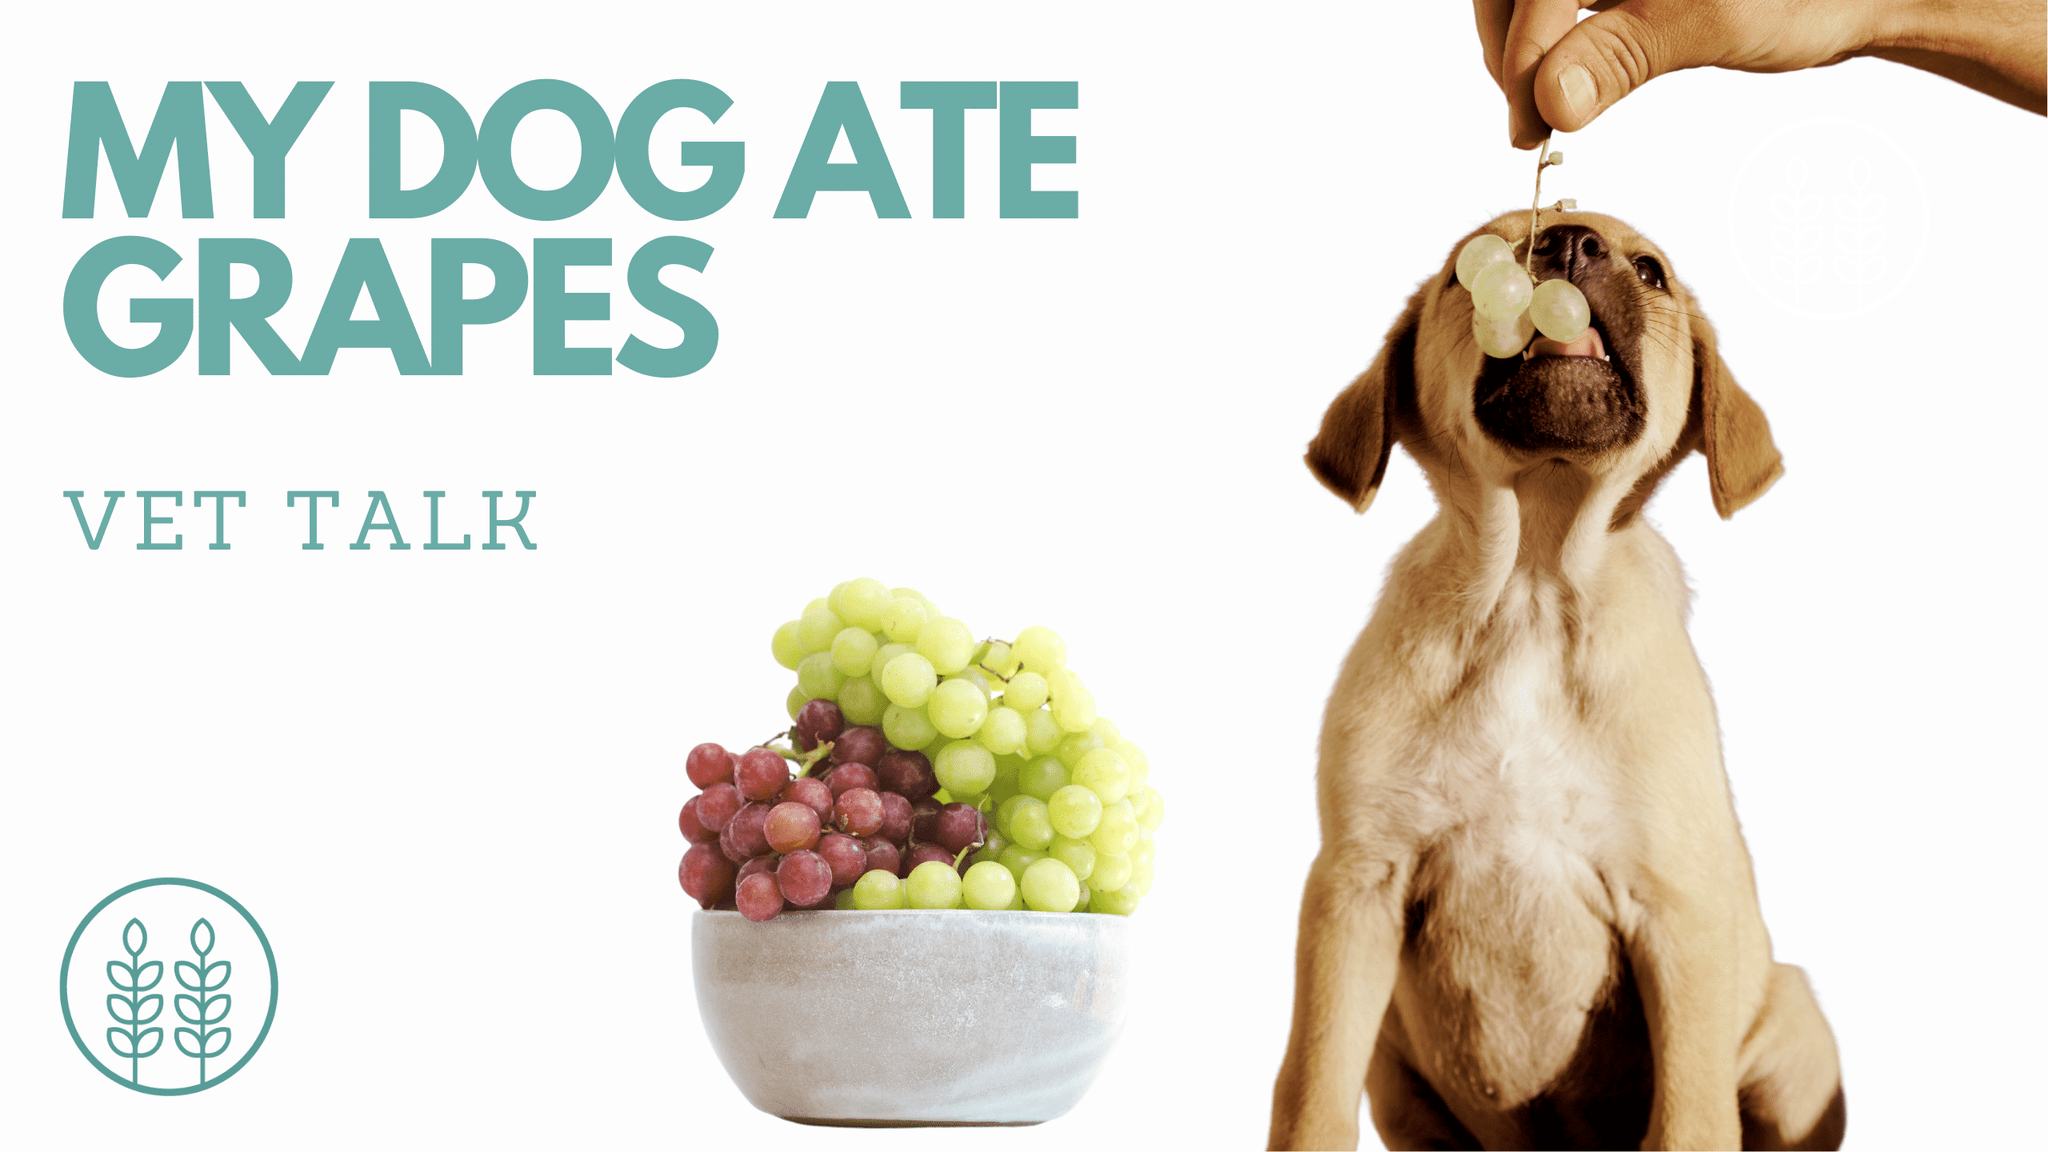 Q: My dog ate grapes. Are they toxic?